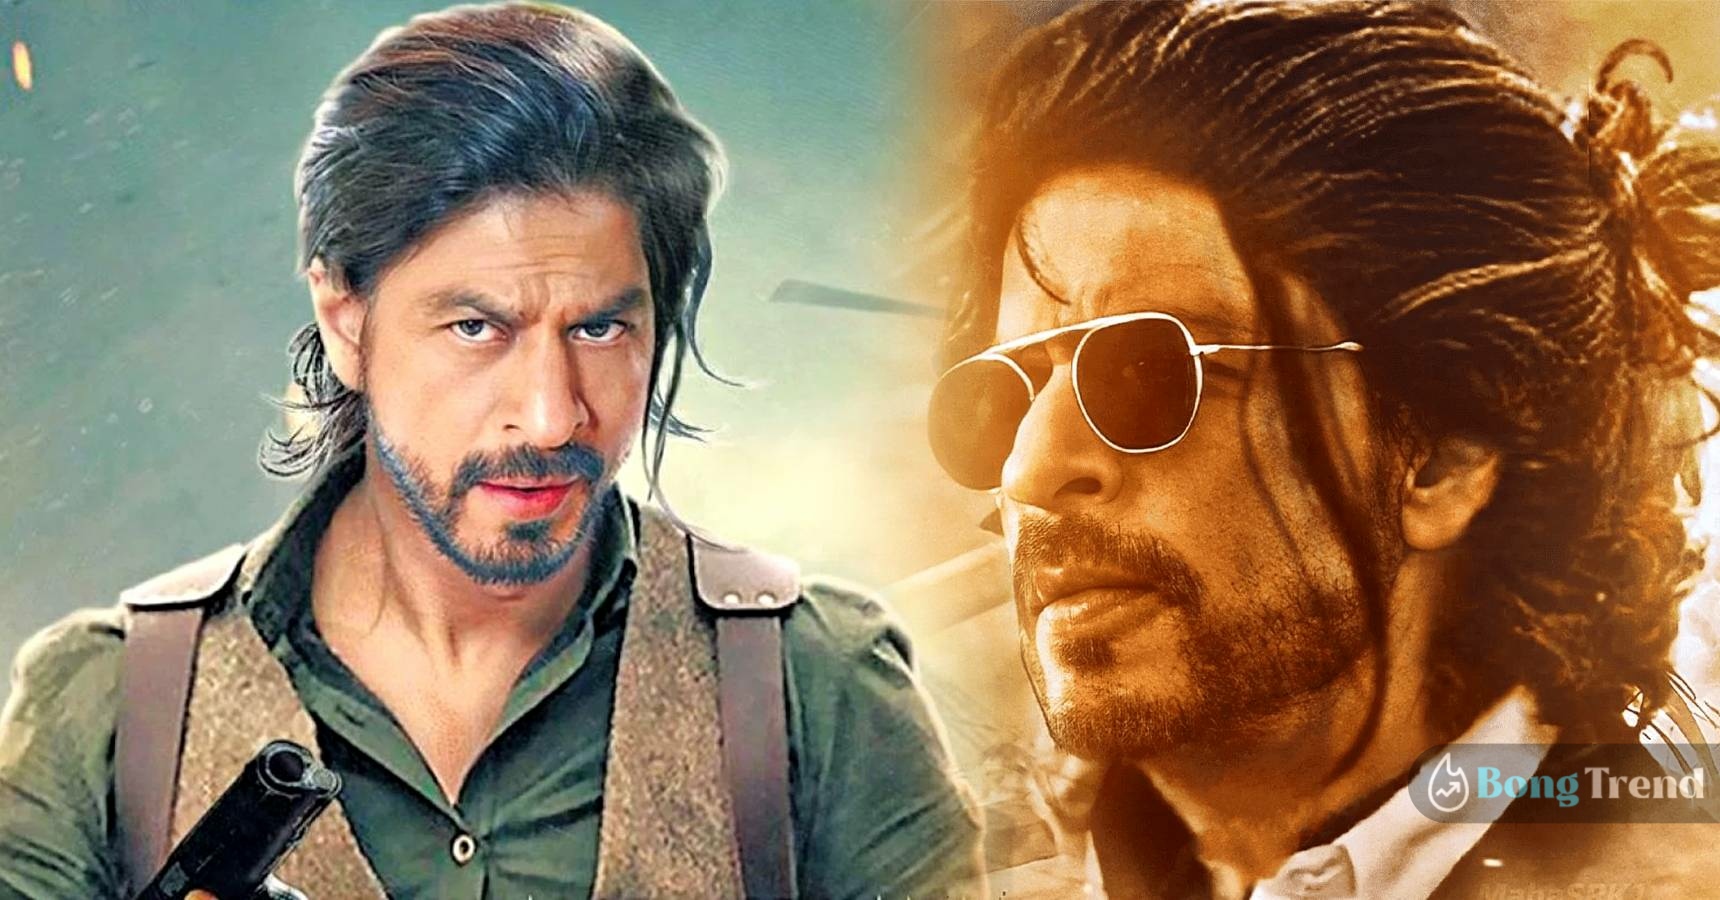 All you need to know about Shah Rukh Khan’s upcoming movies